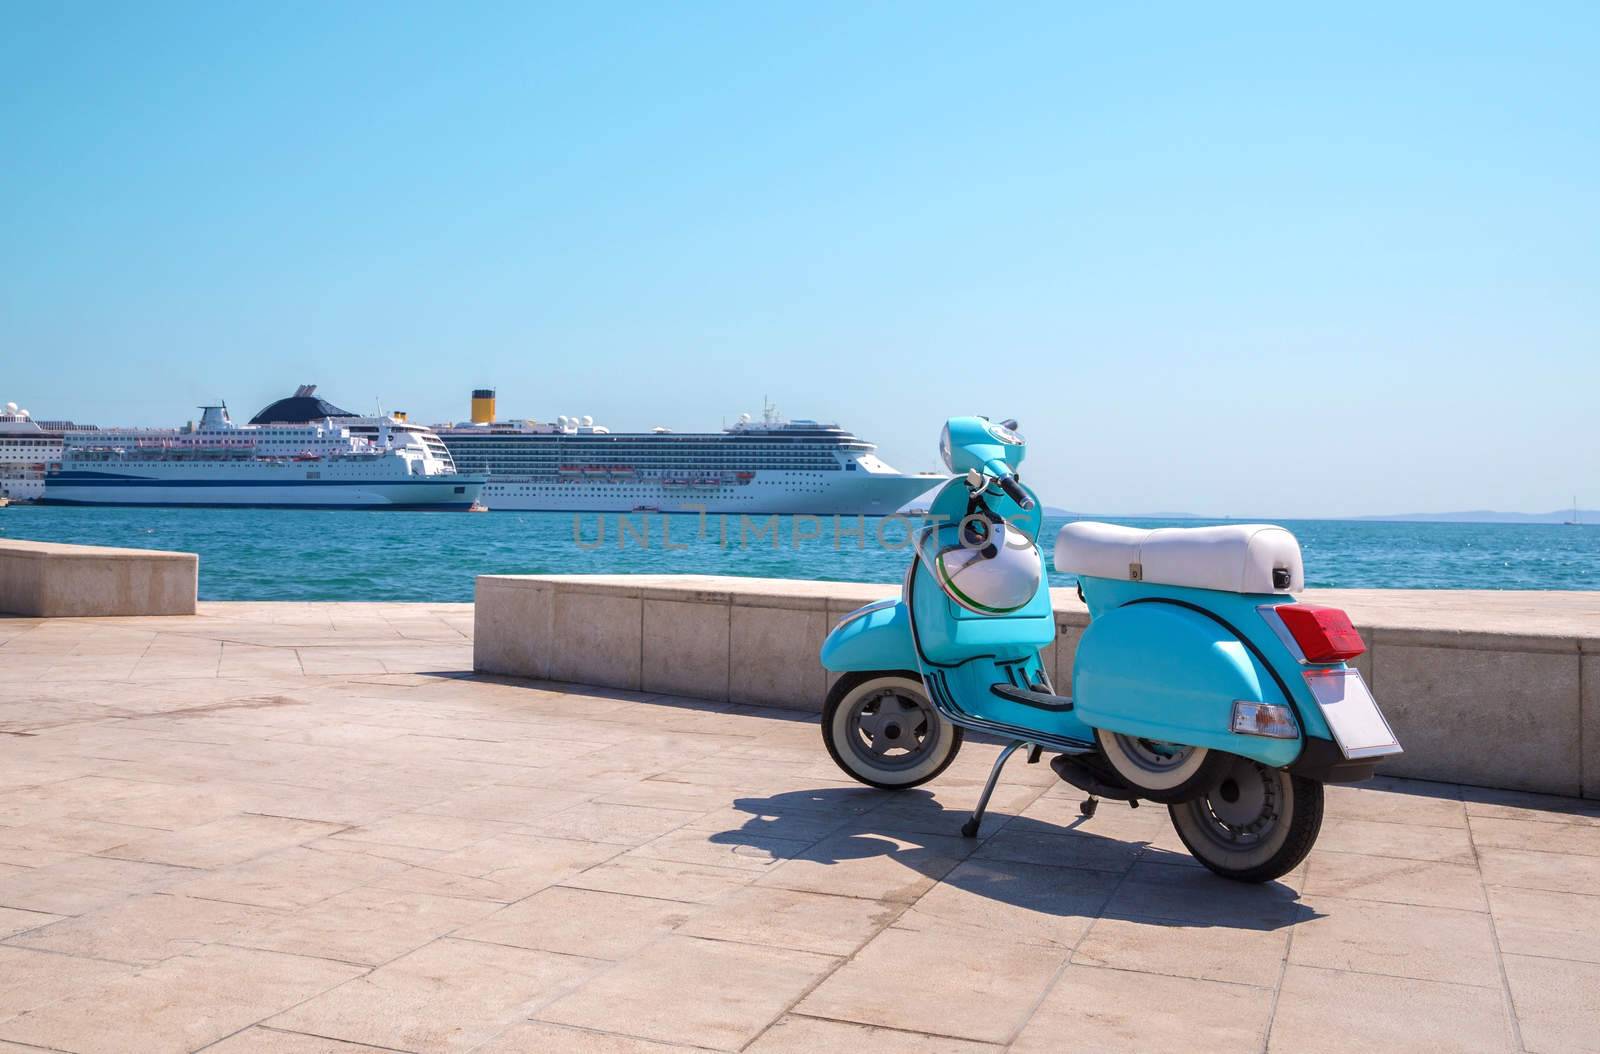 Blue scooter stands on the waterfront on the background of cruise ships in sunny weather